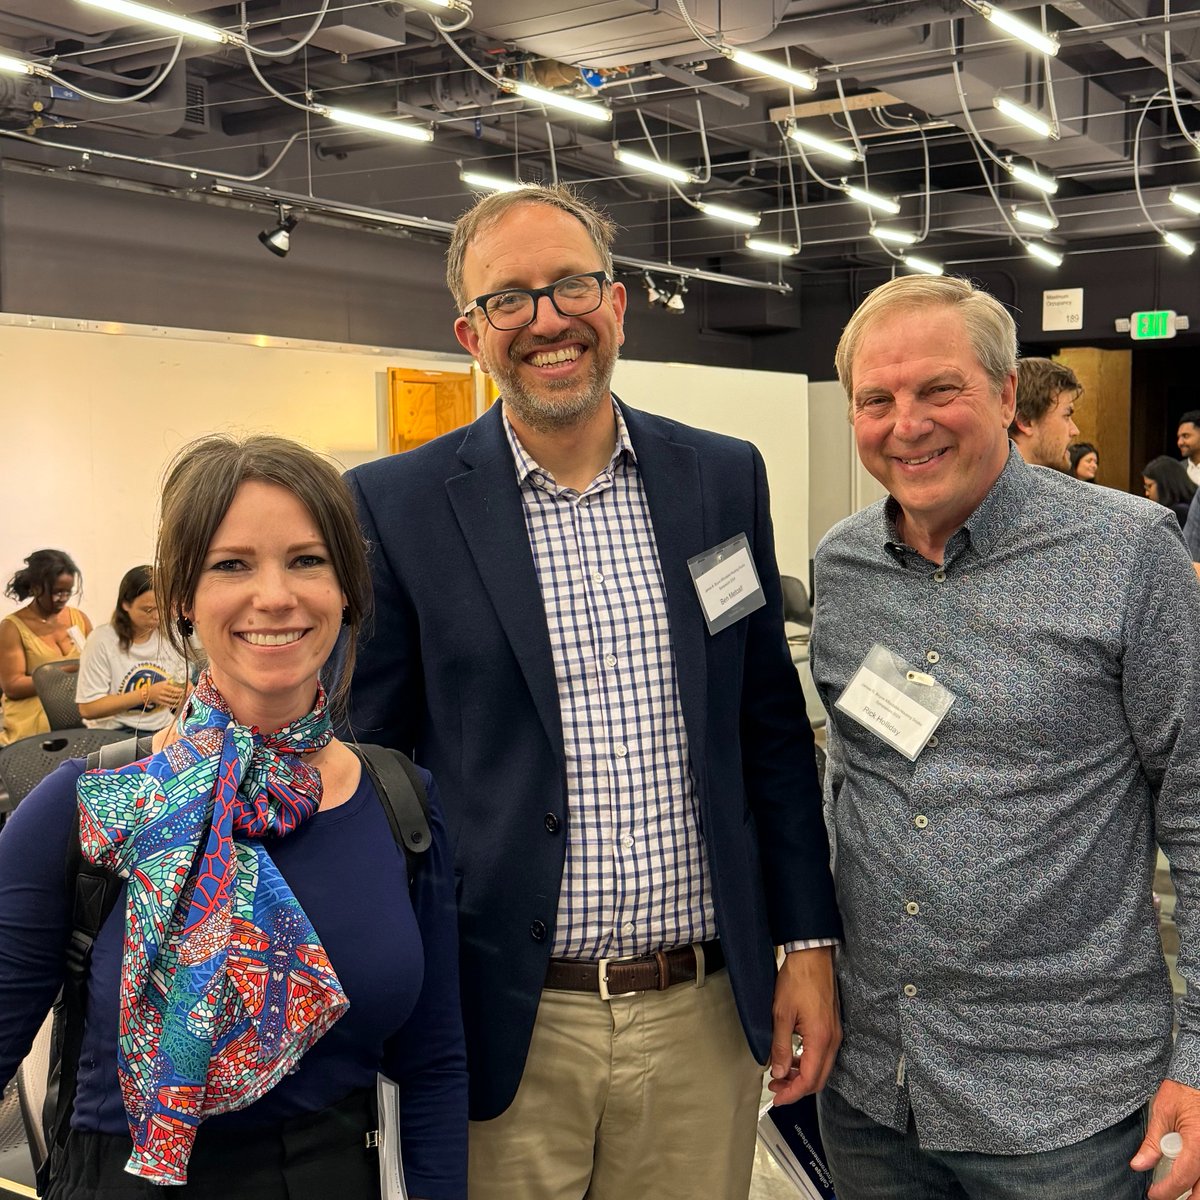 🏘️Thank you, @UCBerkeley @TernerHousing for inviting our staff and having our Executive Dir. @LynnvonkochL on the panel for the James R. Boyce Affordable Housing Studio Symposium! Enjoyed our time discussing #AffordableHousing with students & attendees! #CaliforniaforAll